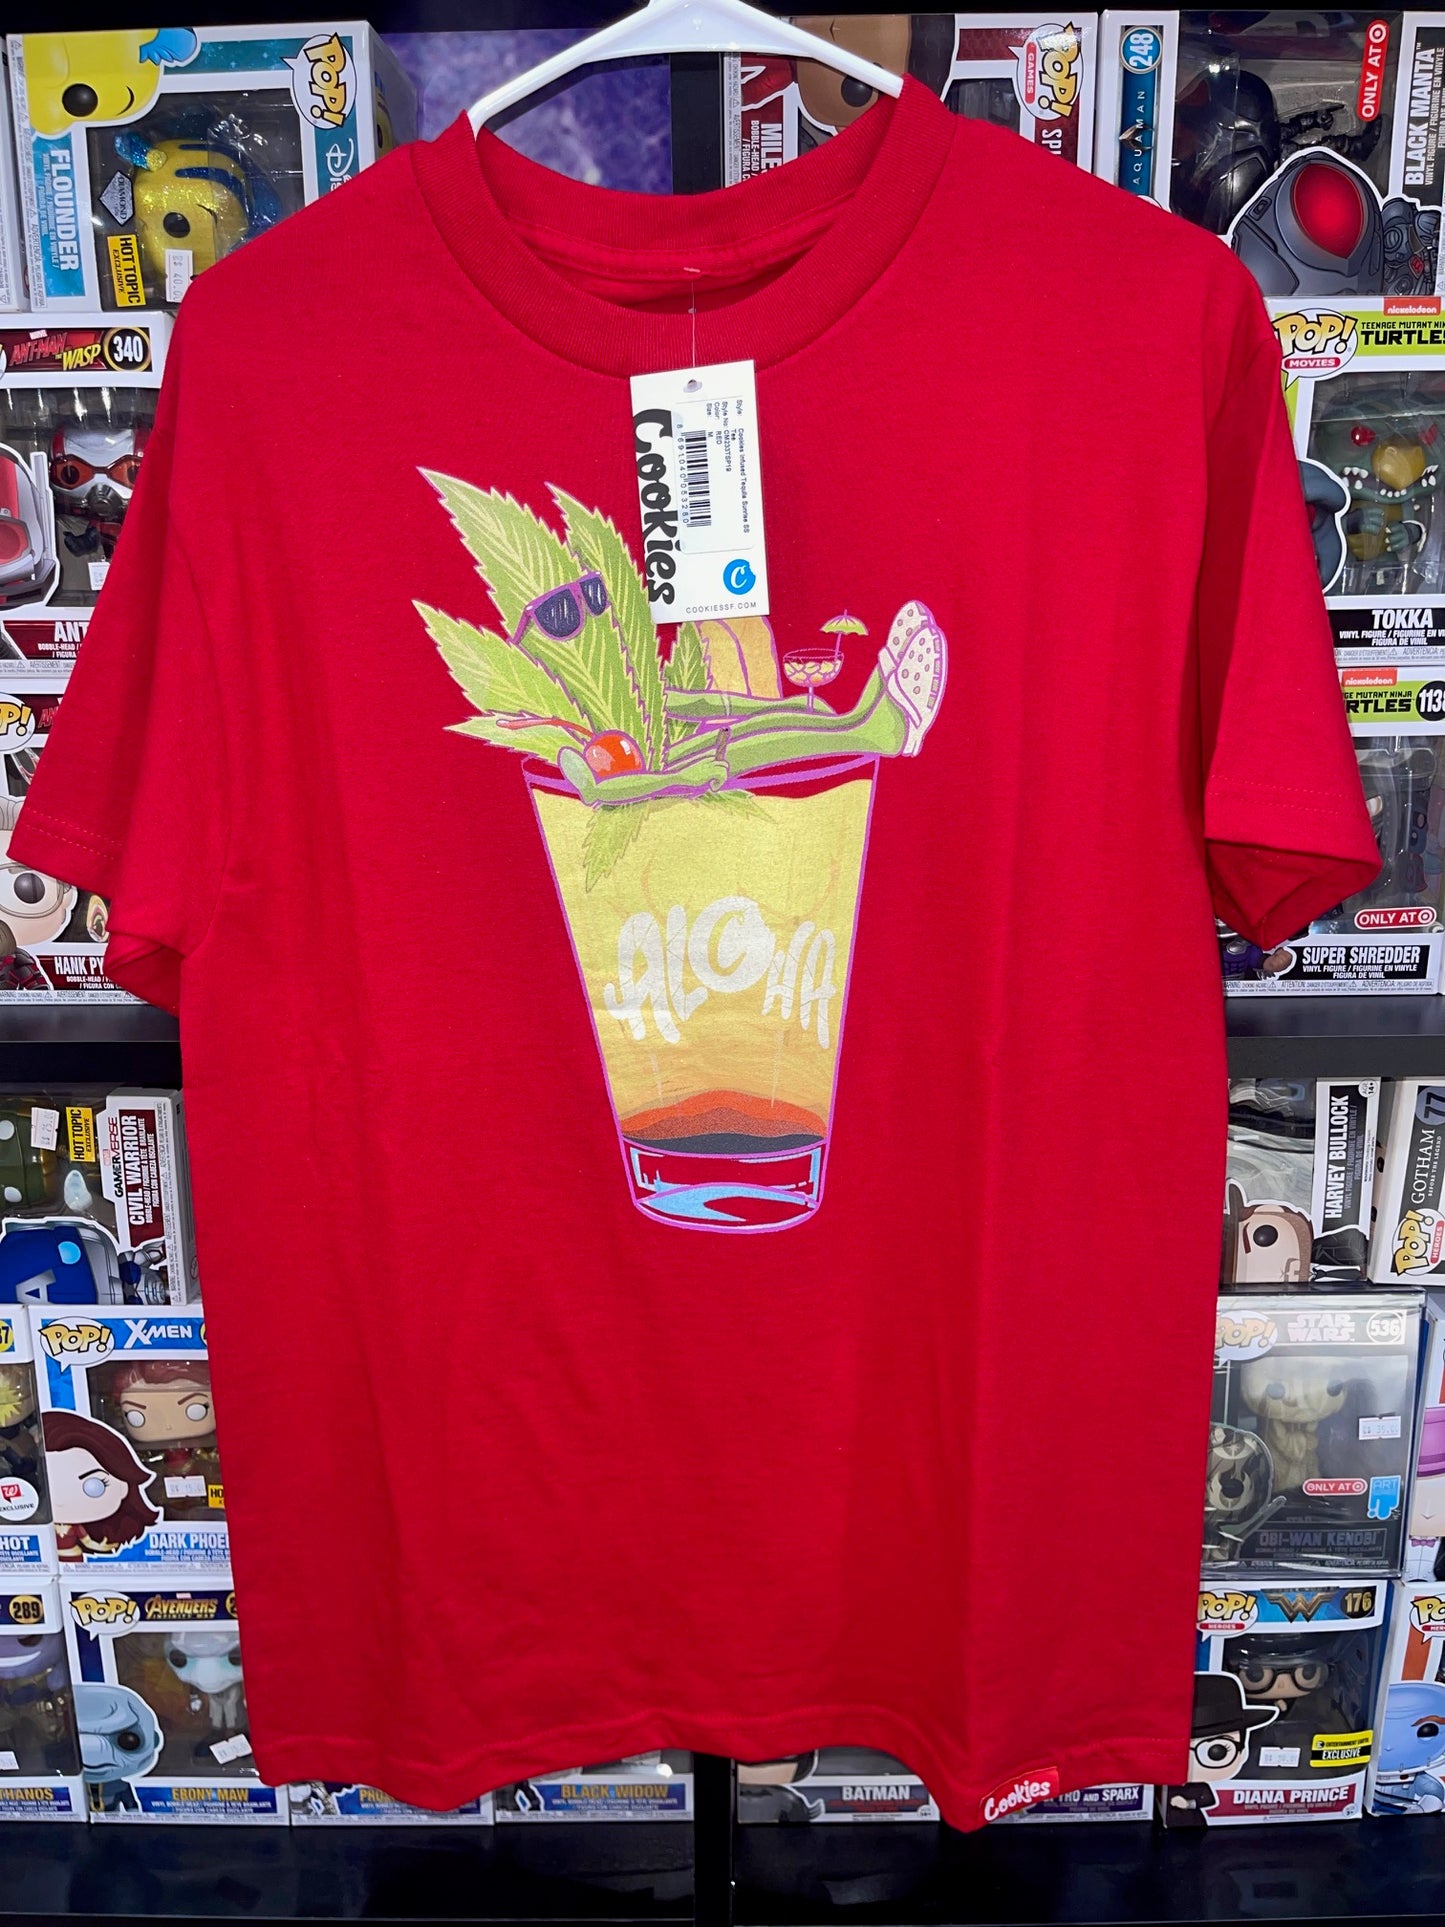 Cookies SF "Infused Tequila Sunrise" ss t-shirt